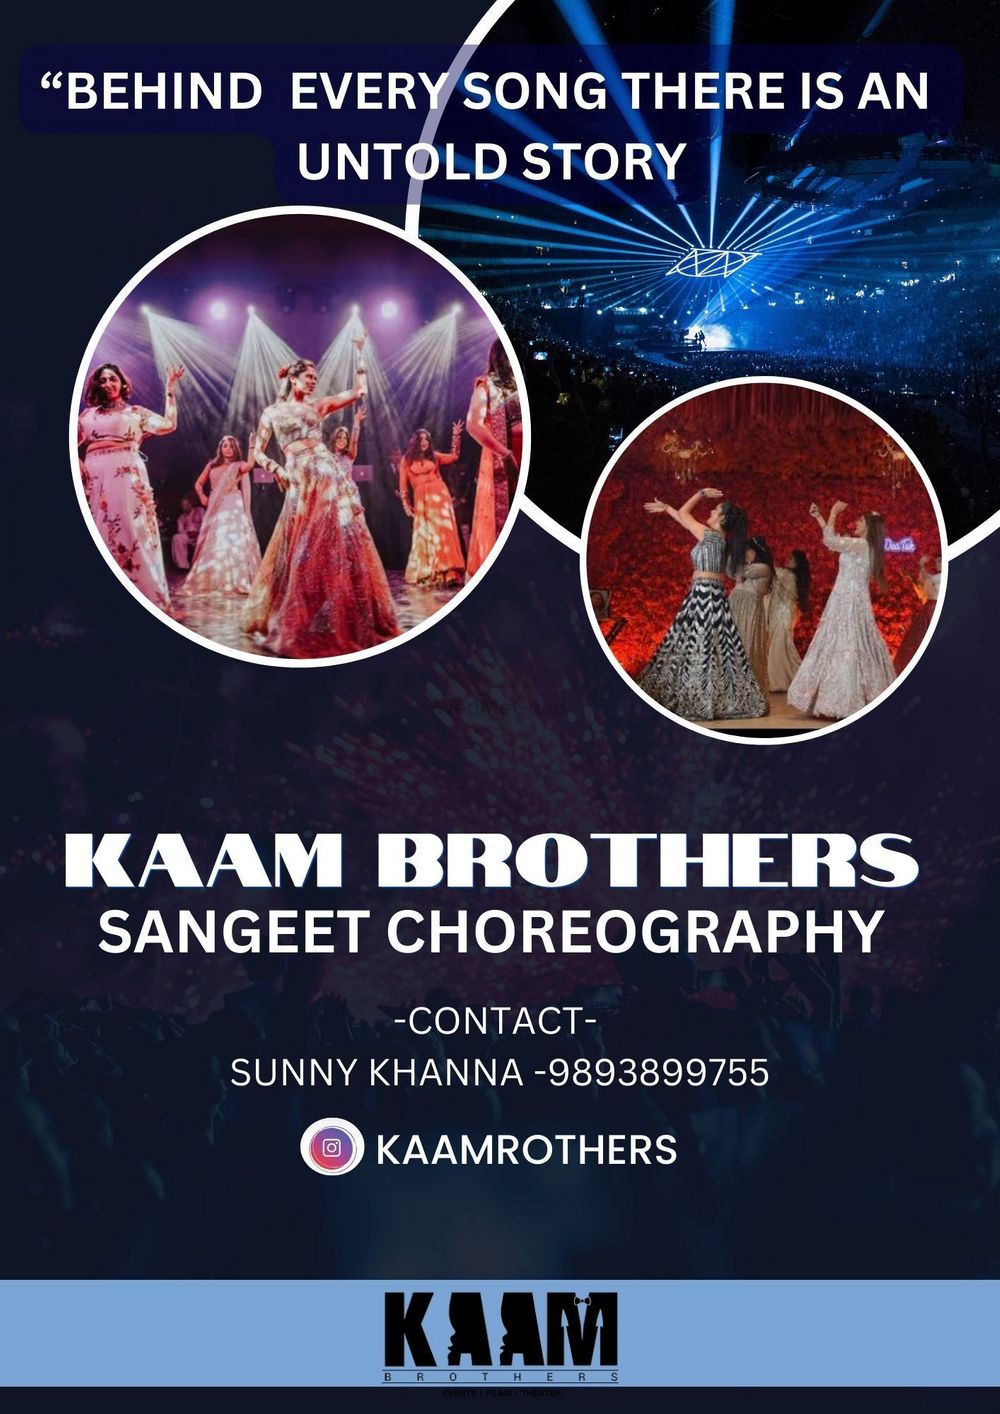 Photo By Kaam Brothers - Sangeet Choreographer